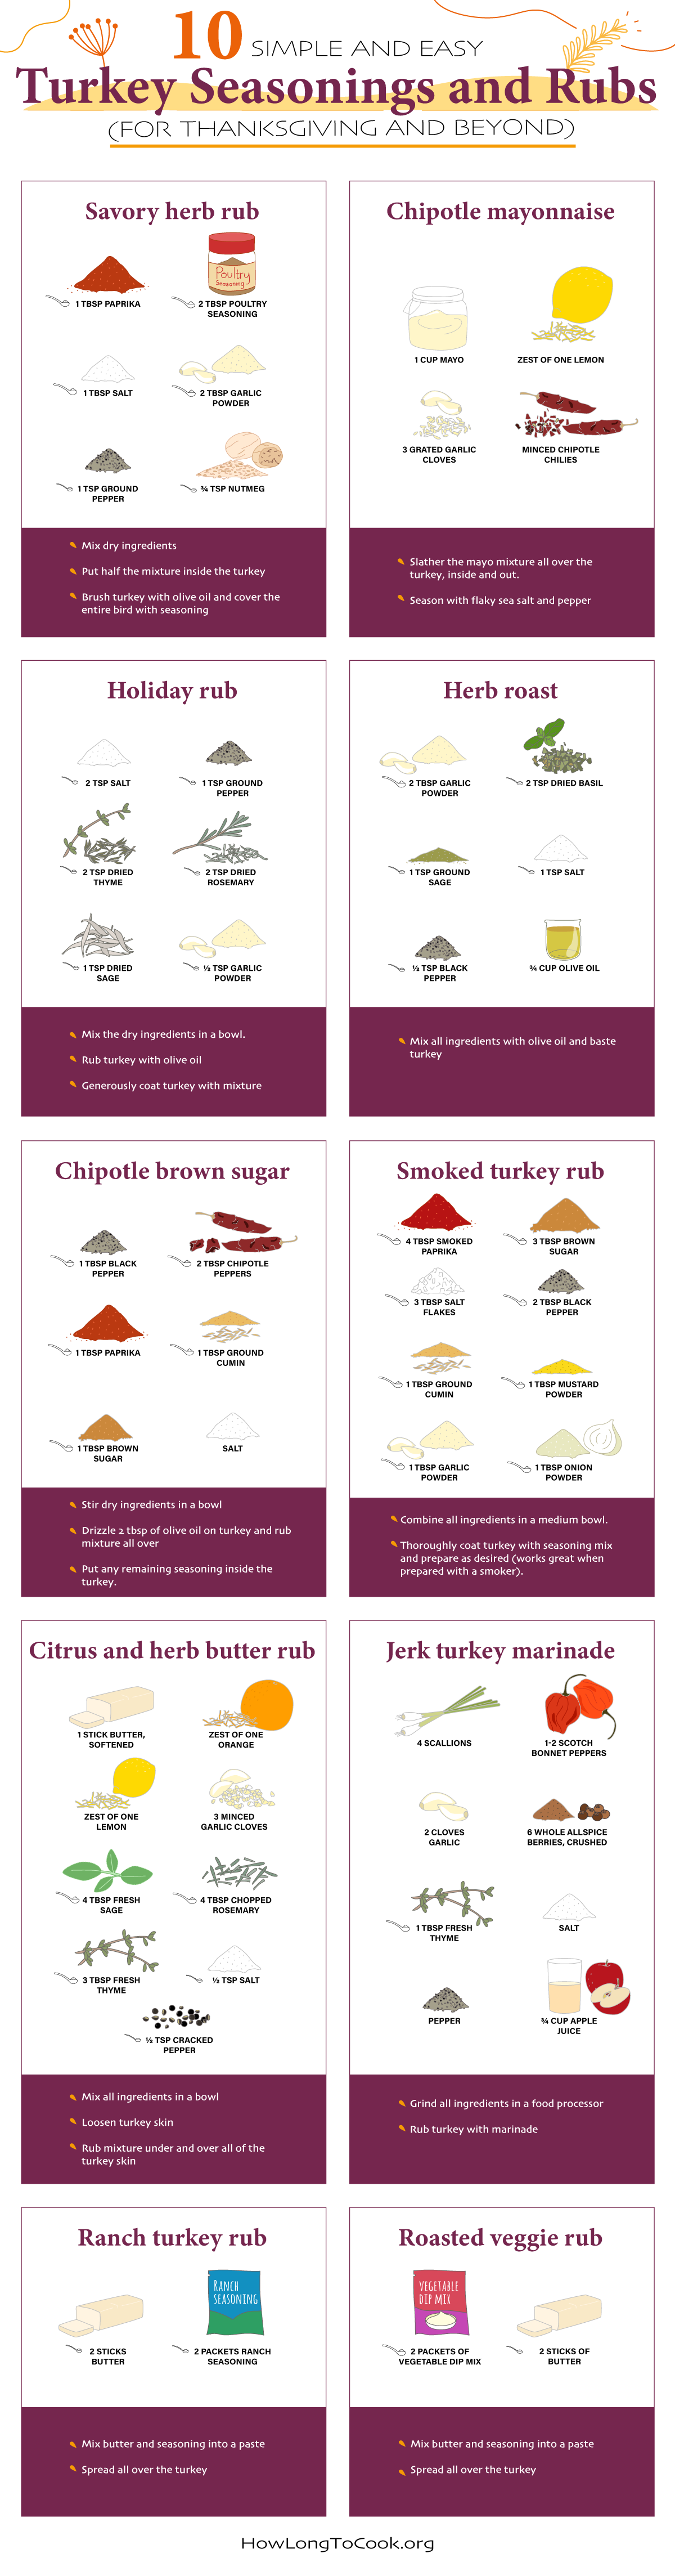 10 Simple and Easy Turkey Seasonings and Rubs (for Thanksgiving and Beyond) - How Long To Cook - Infographic